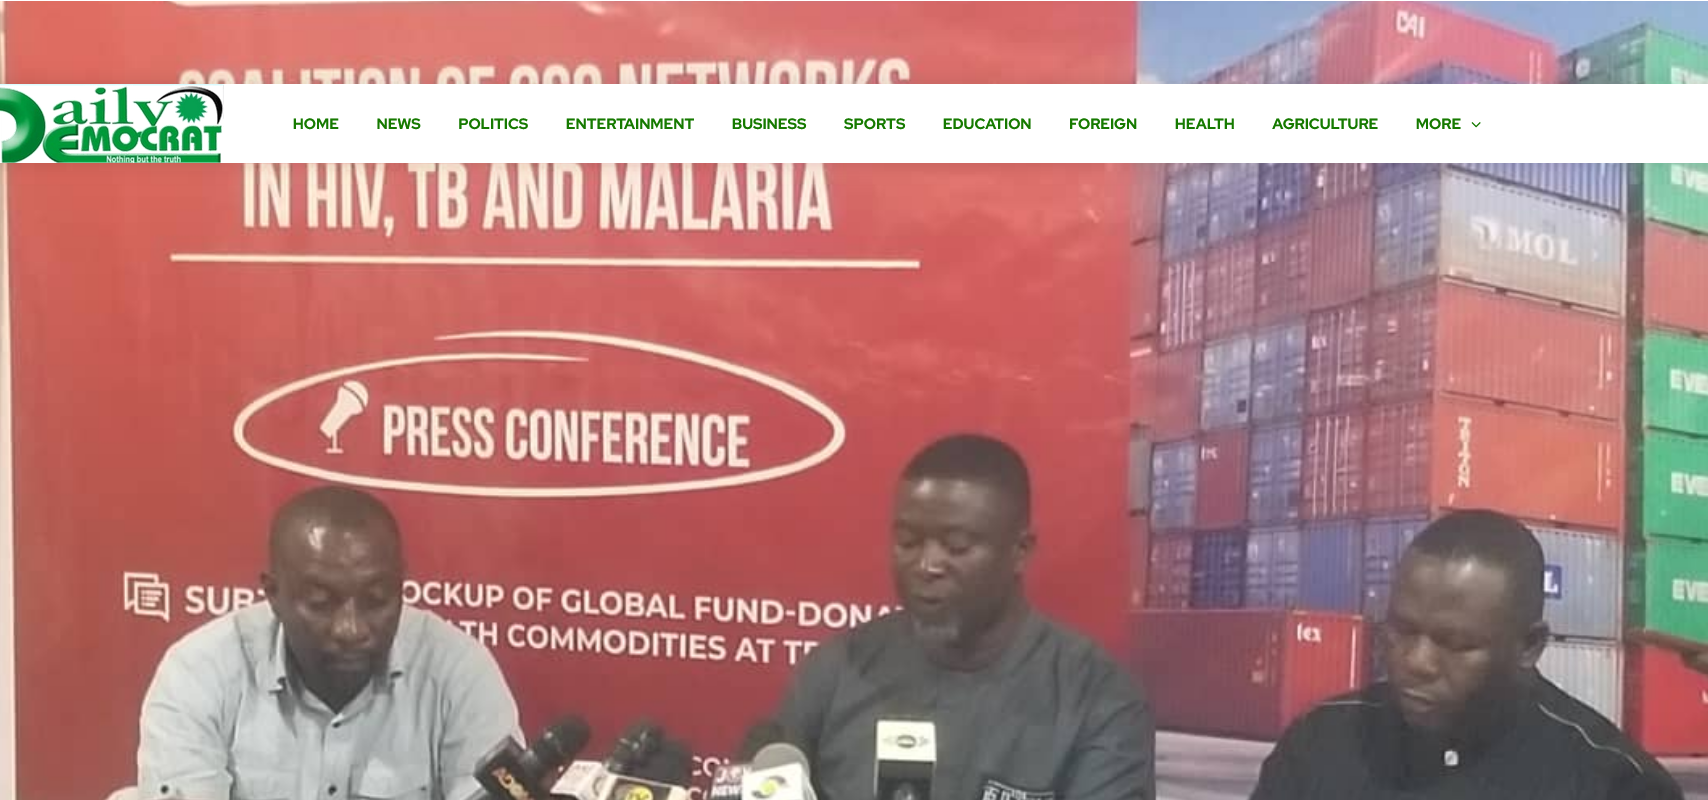 CSO Networks in HIV, TB and Malaria to demonstrate in Accra against the lockup of Global Fund-health commodities